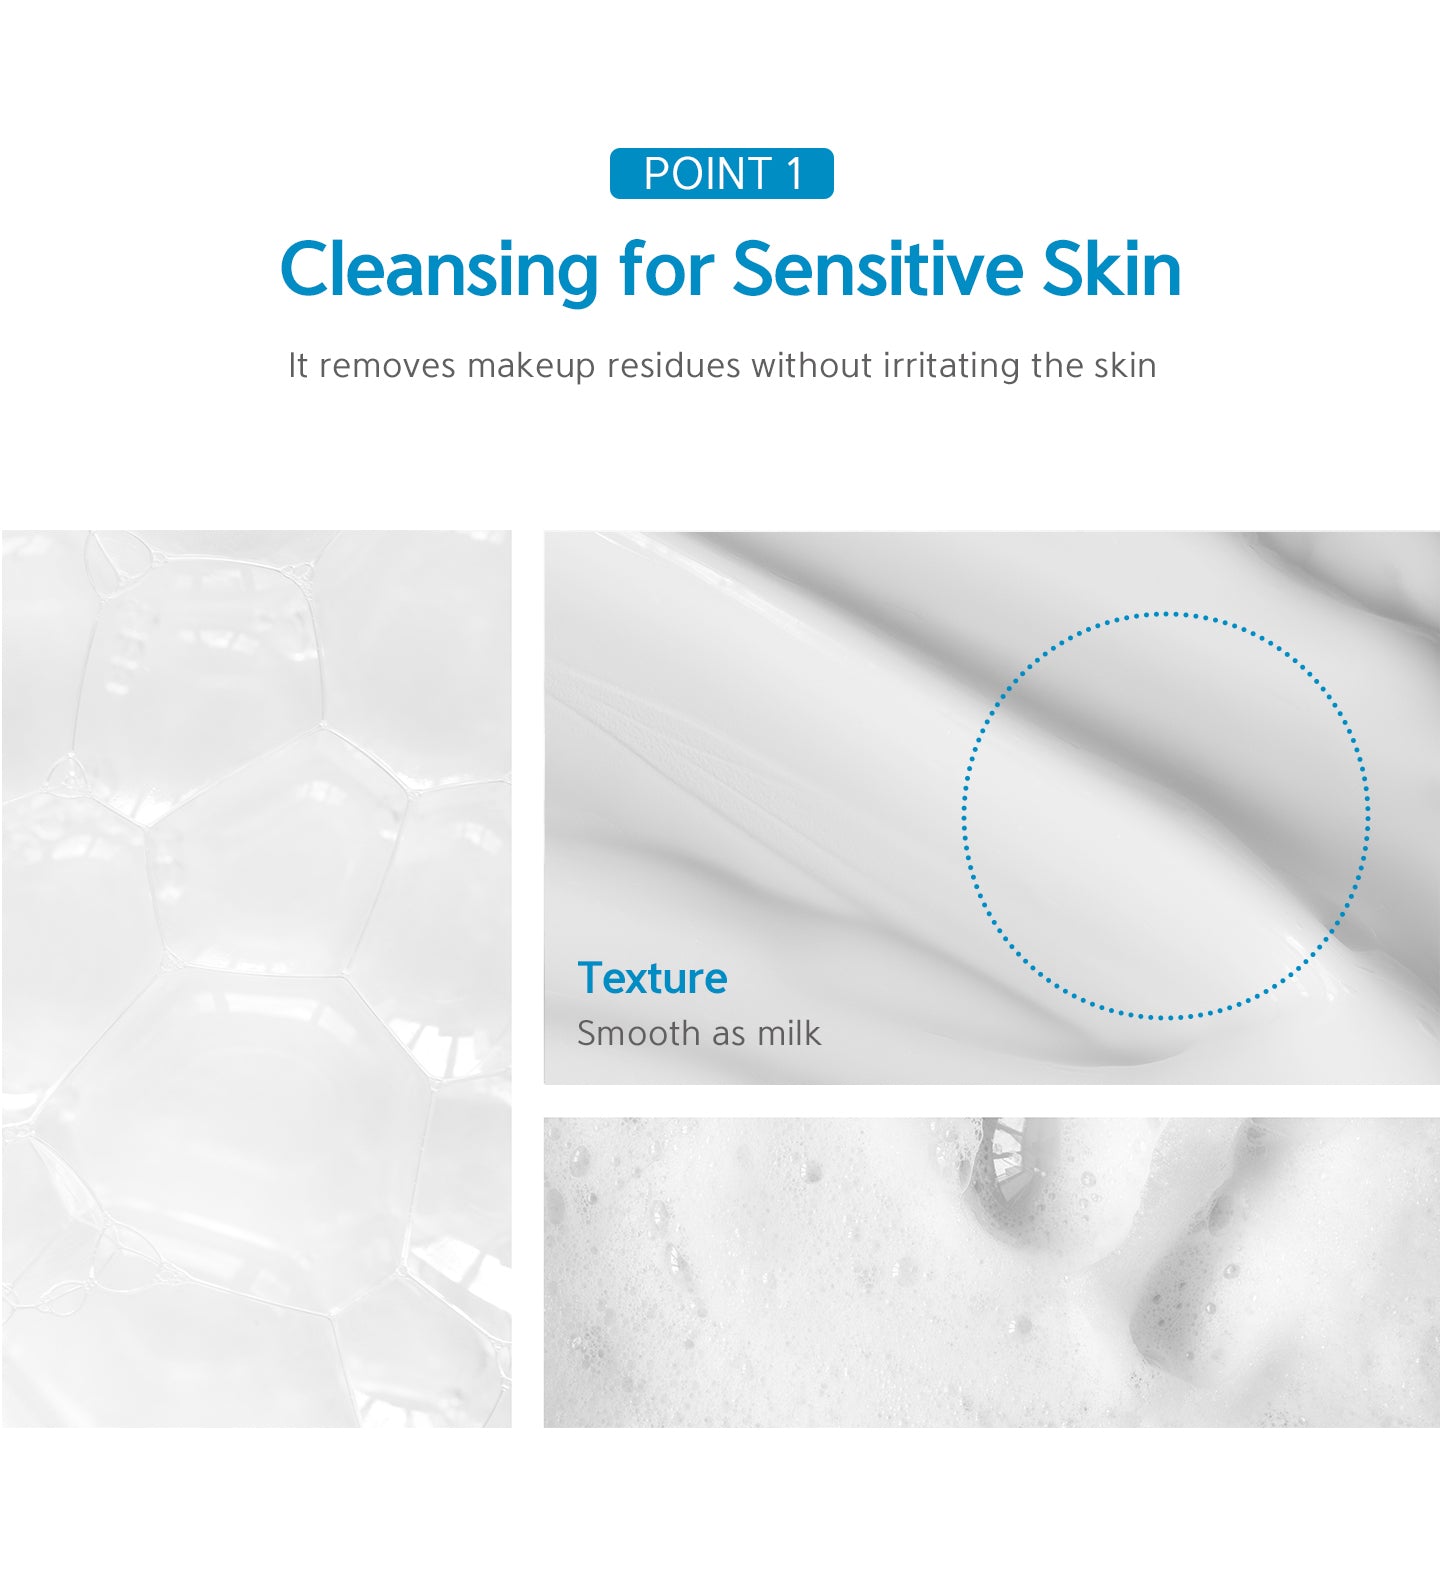 Cleansing for sensitive skin. It removes makeup residues without irritating the skin. 